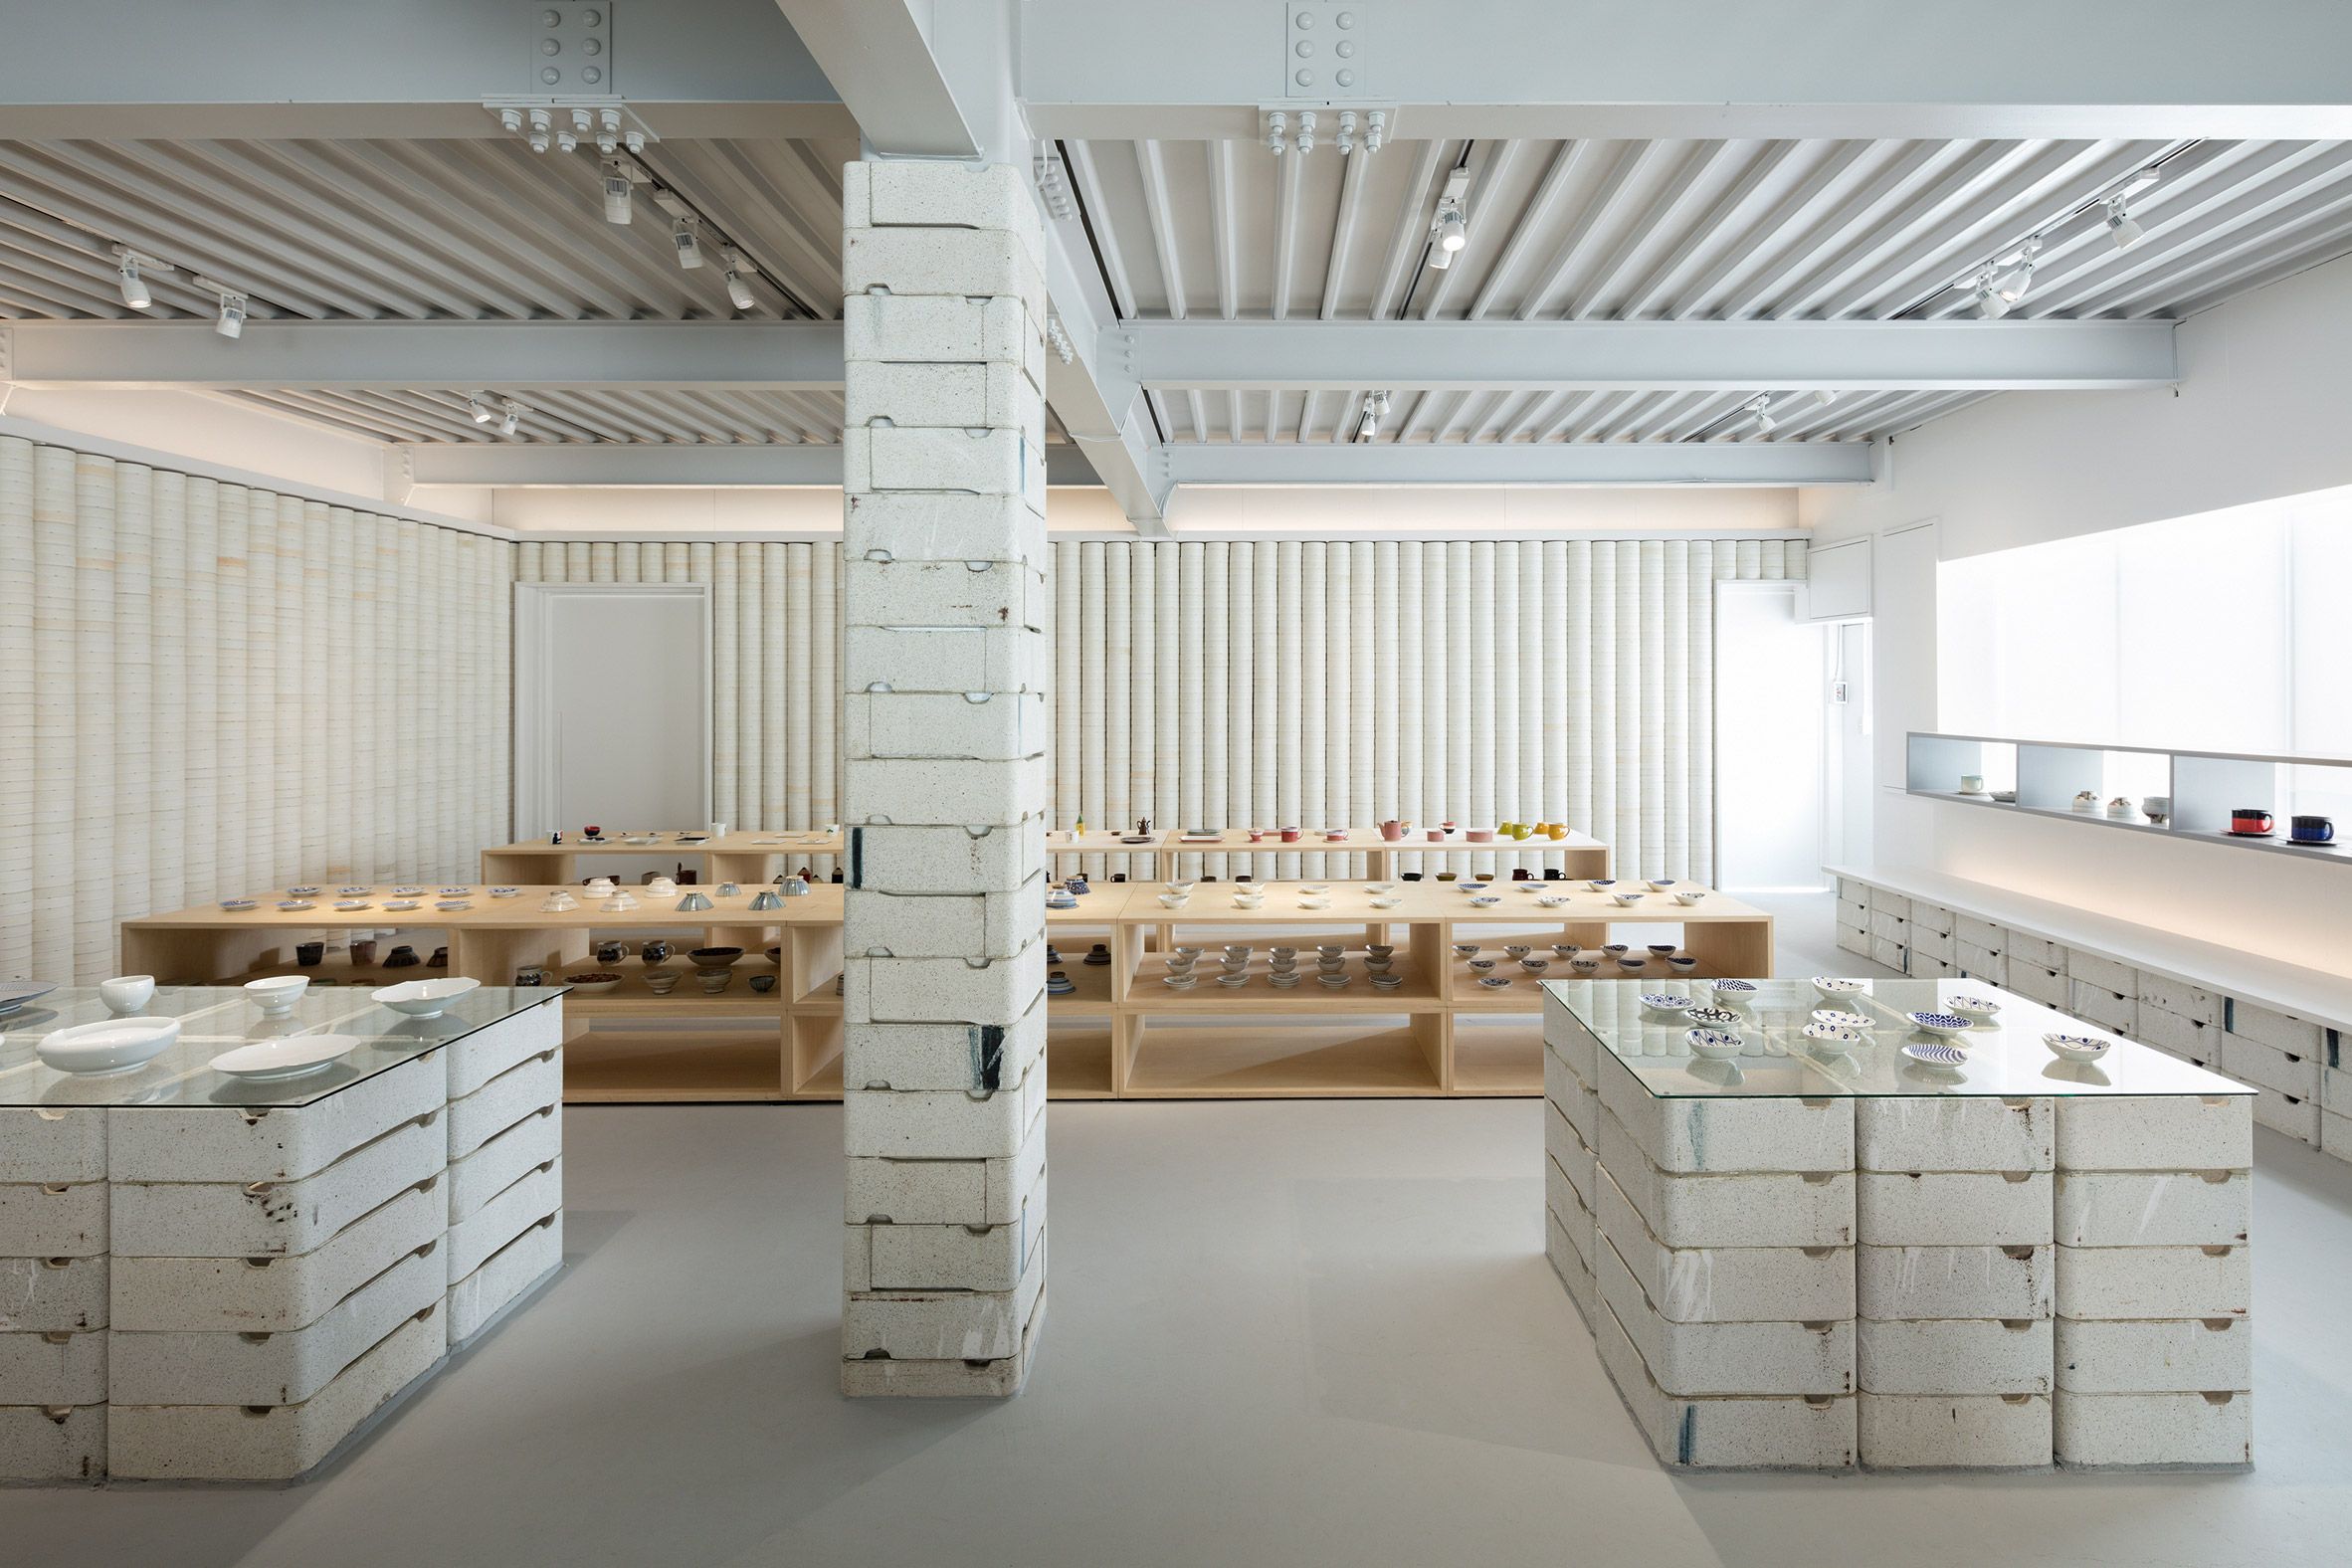 Do Do has used remnants of porcelain to update this ceramics shop ...